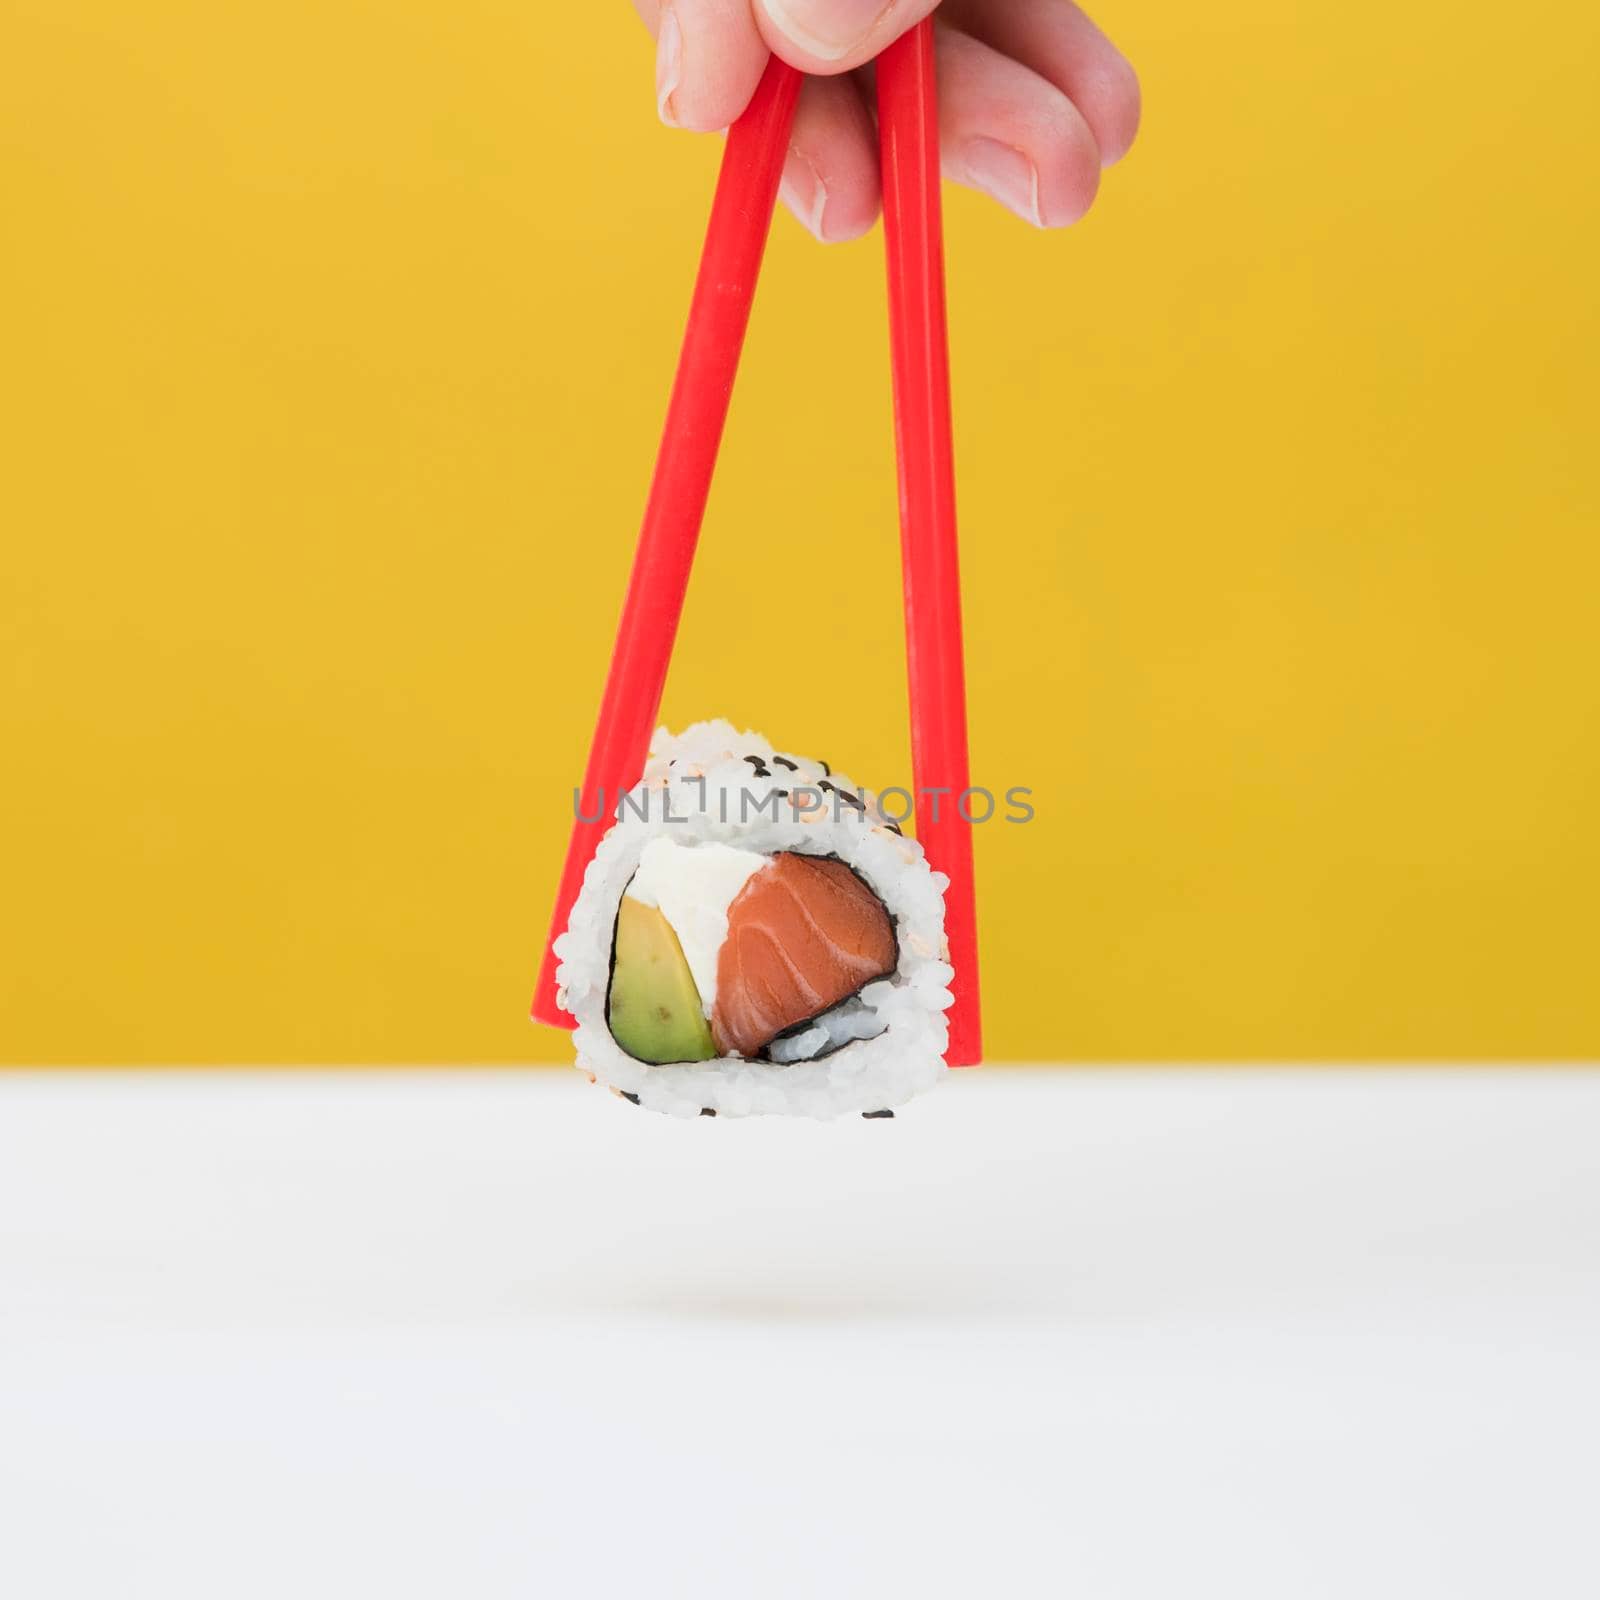 close up person s hand holding sushi with red chopsticks against yellow backdrop